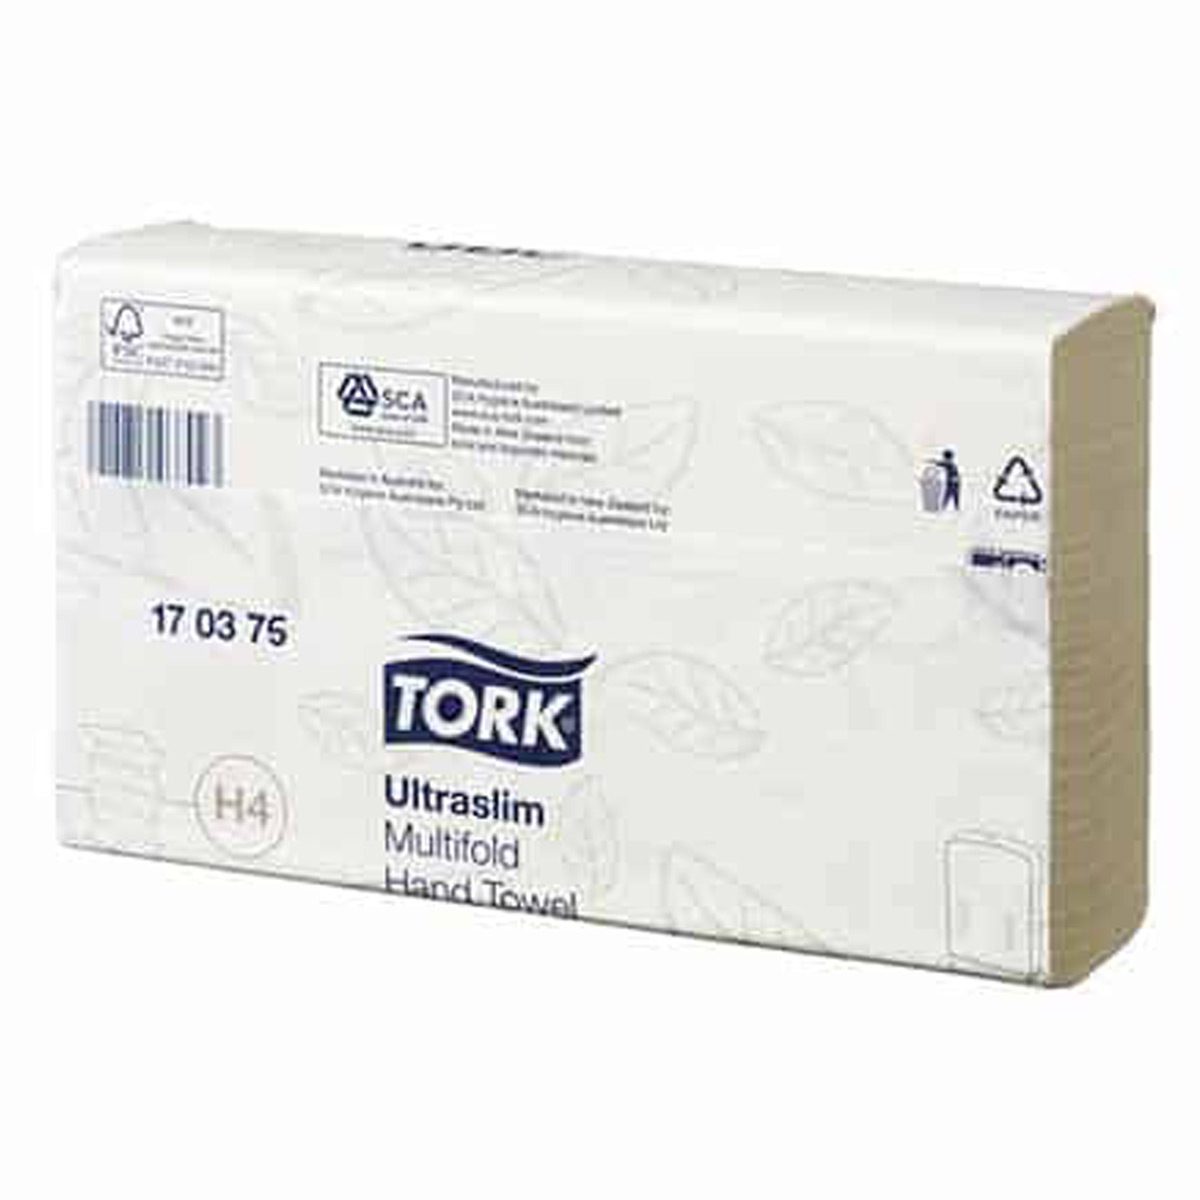 paper-products-paper-towels-tork-ultra-slim-towel-advanced-1-ply-150-sheets-20-packs-h4-fit-variety-of-in-built-dispensers-unique-multifold-design-reduce-waste-vjs-distributors-170375